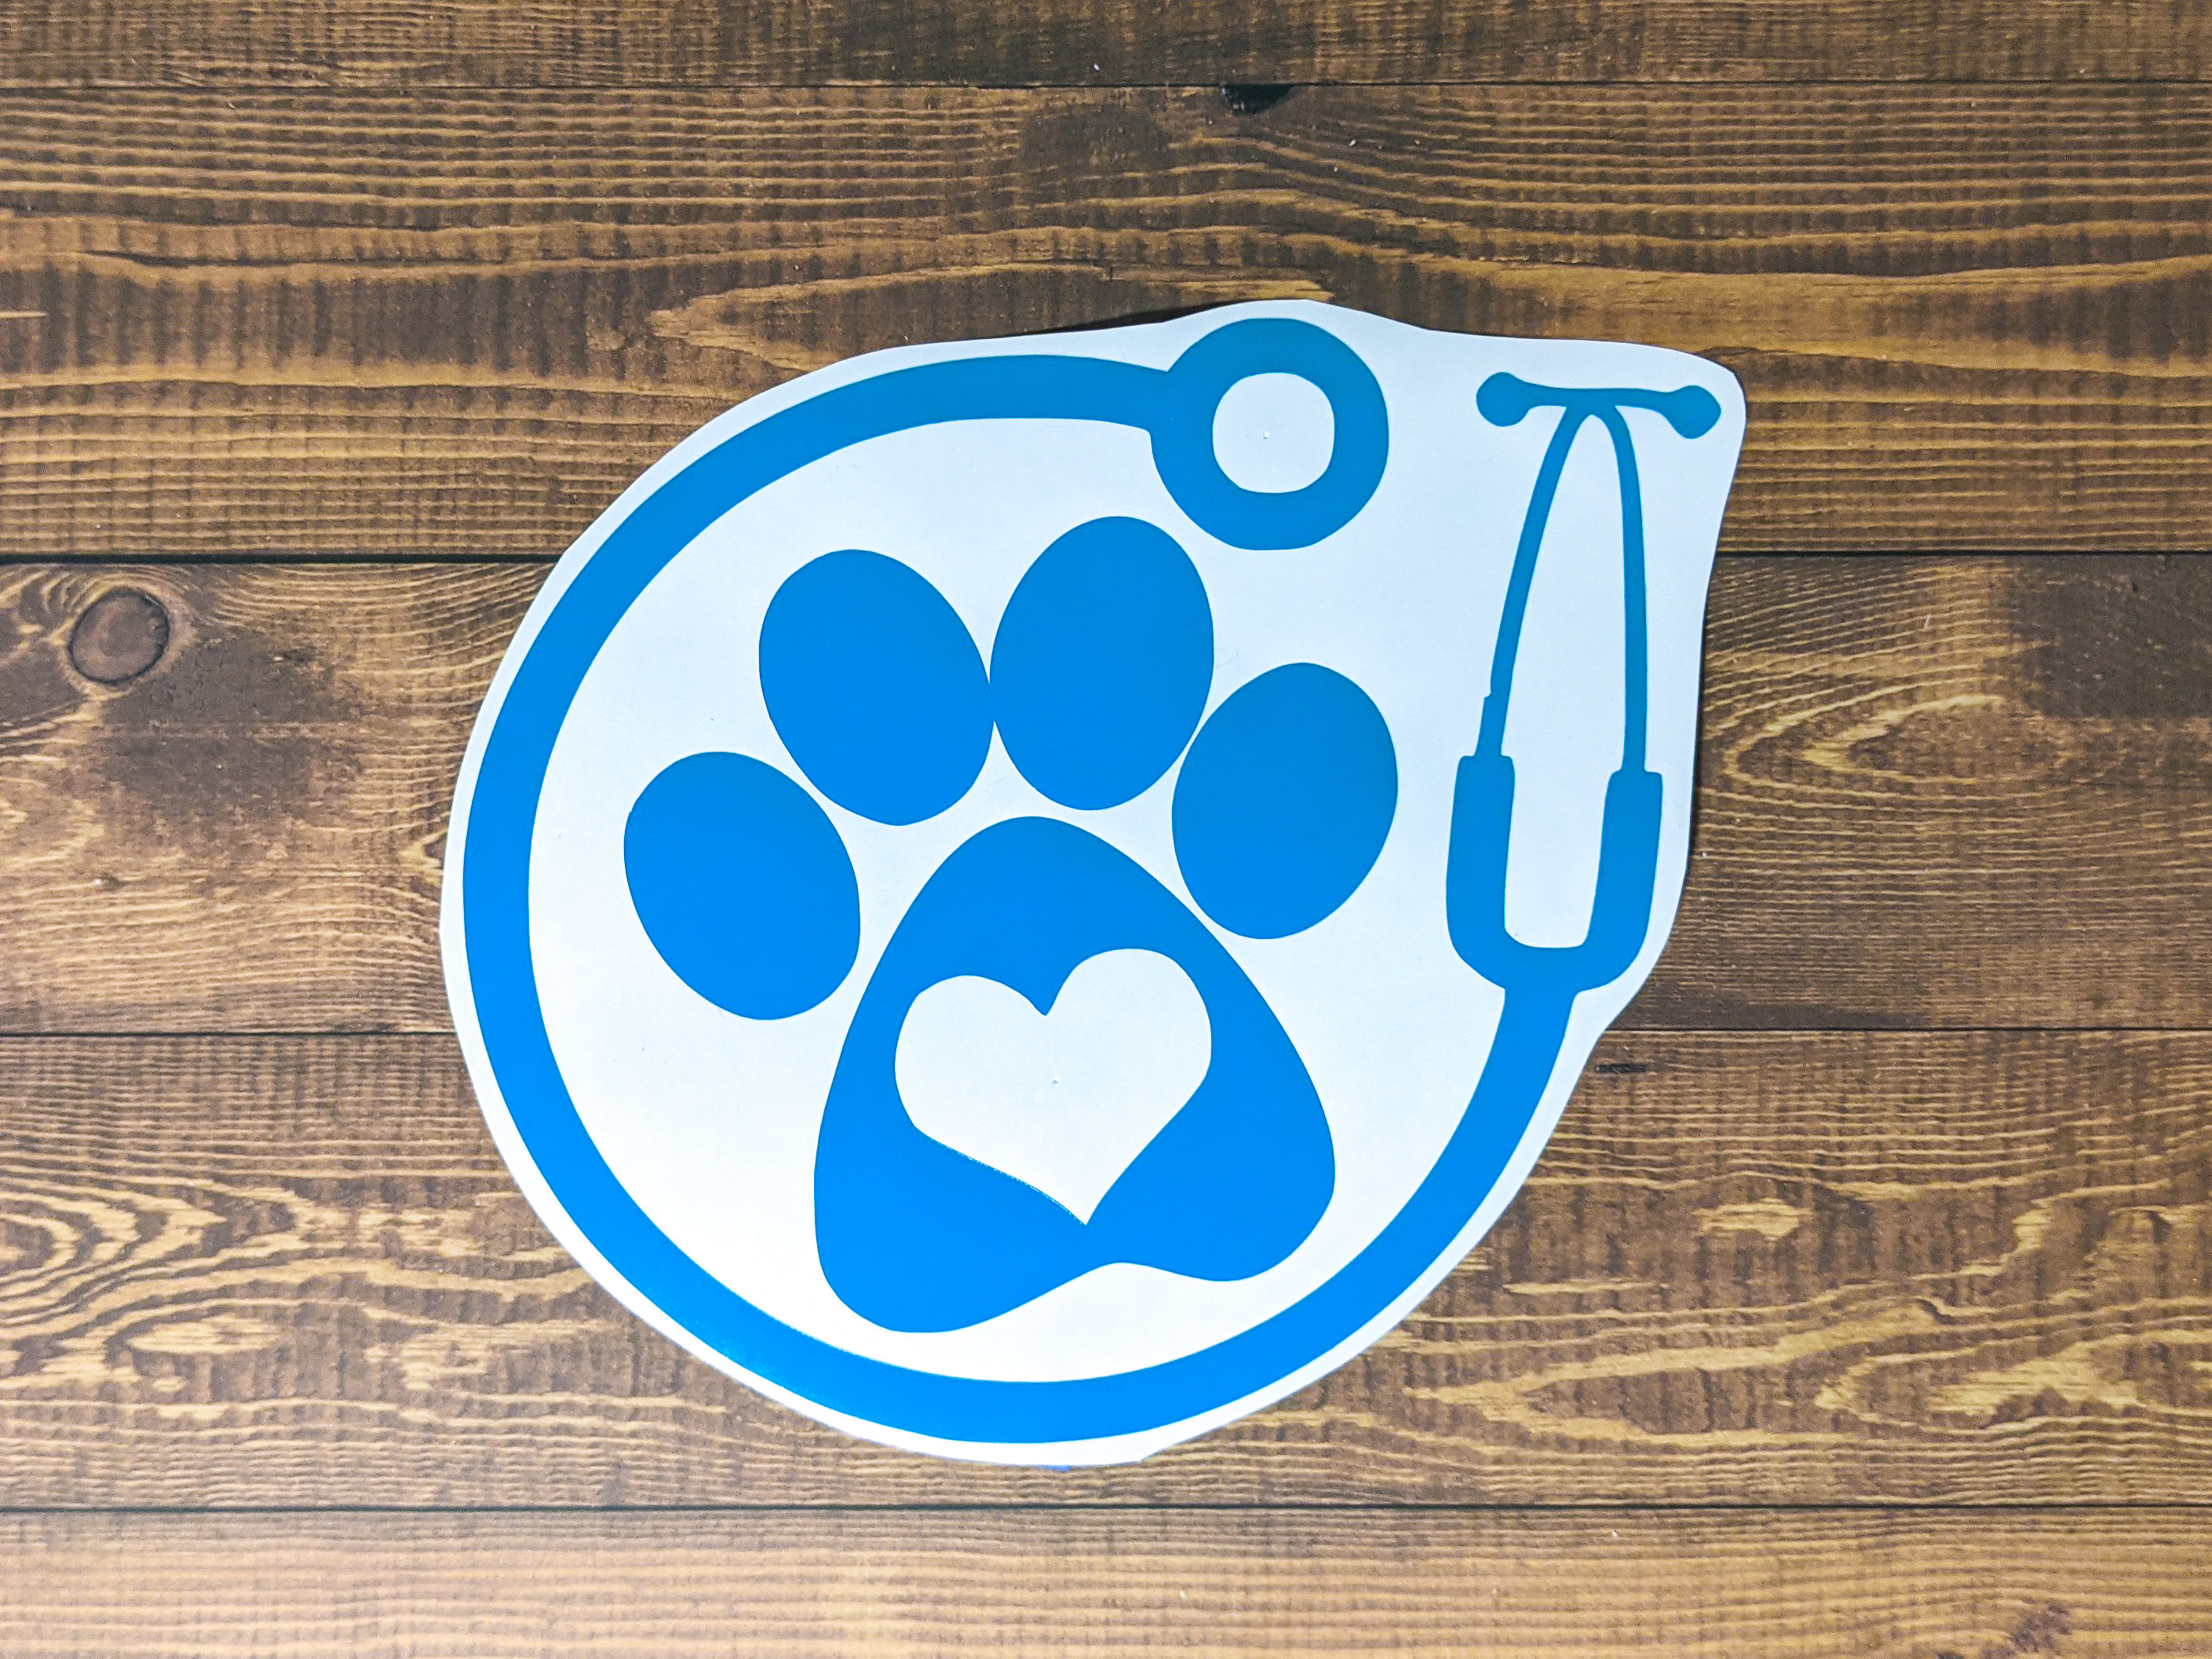 Lovely Vinyl Decal for Veterinary Medicine Professionals